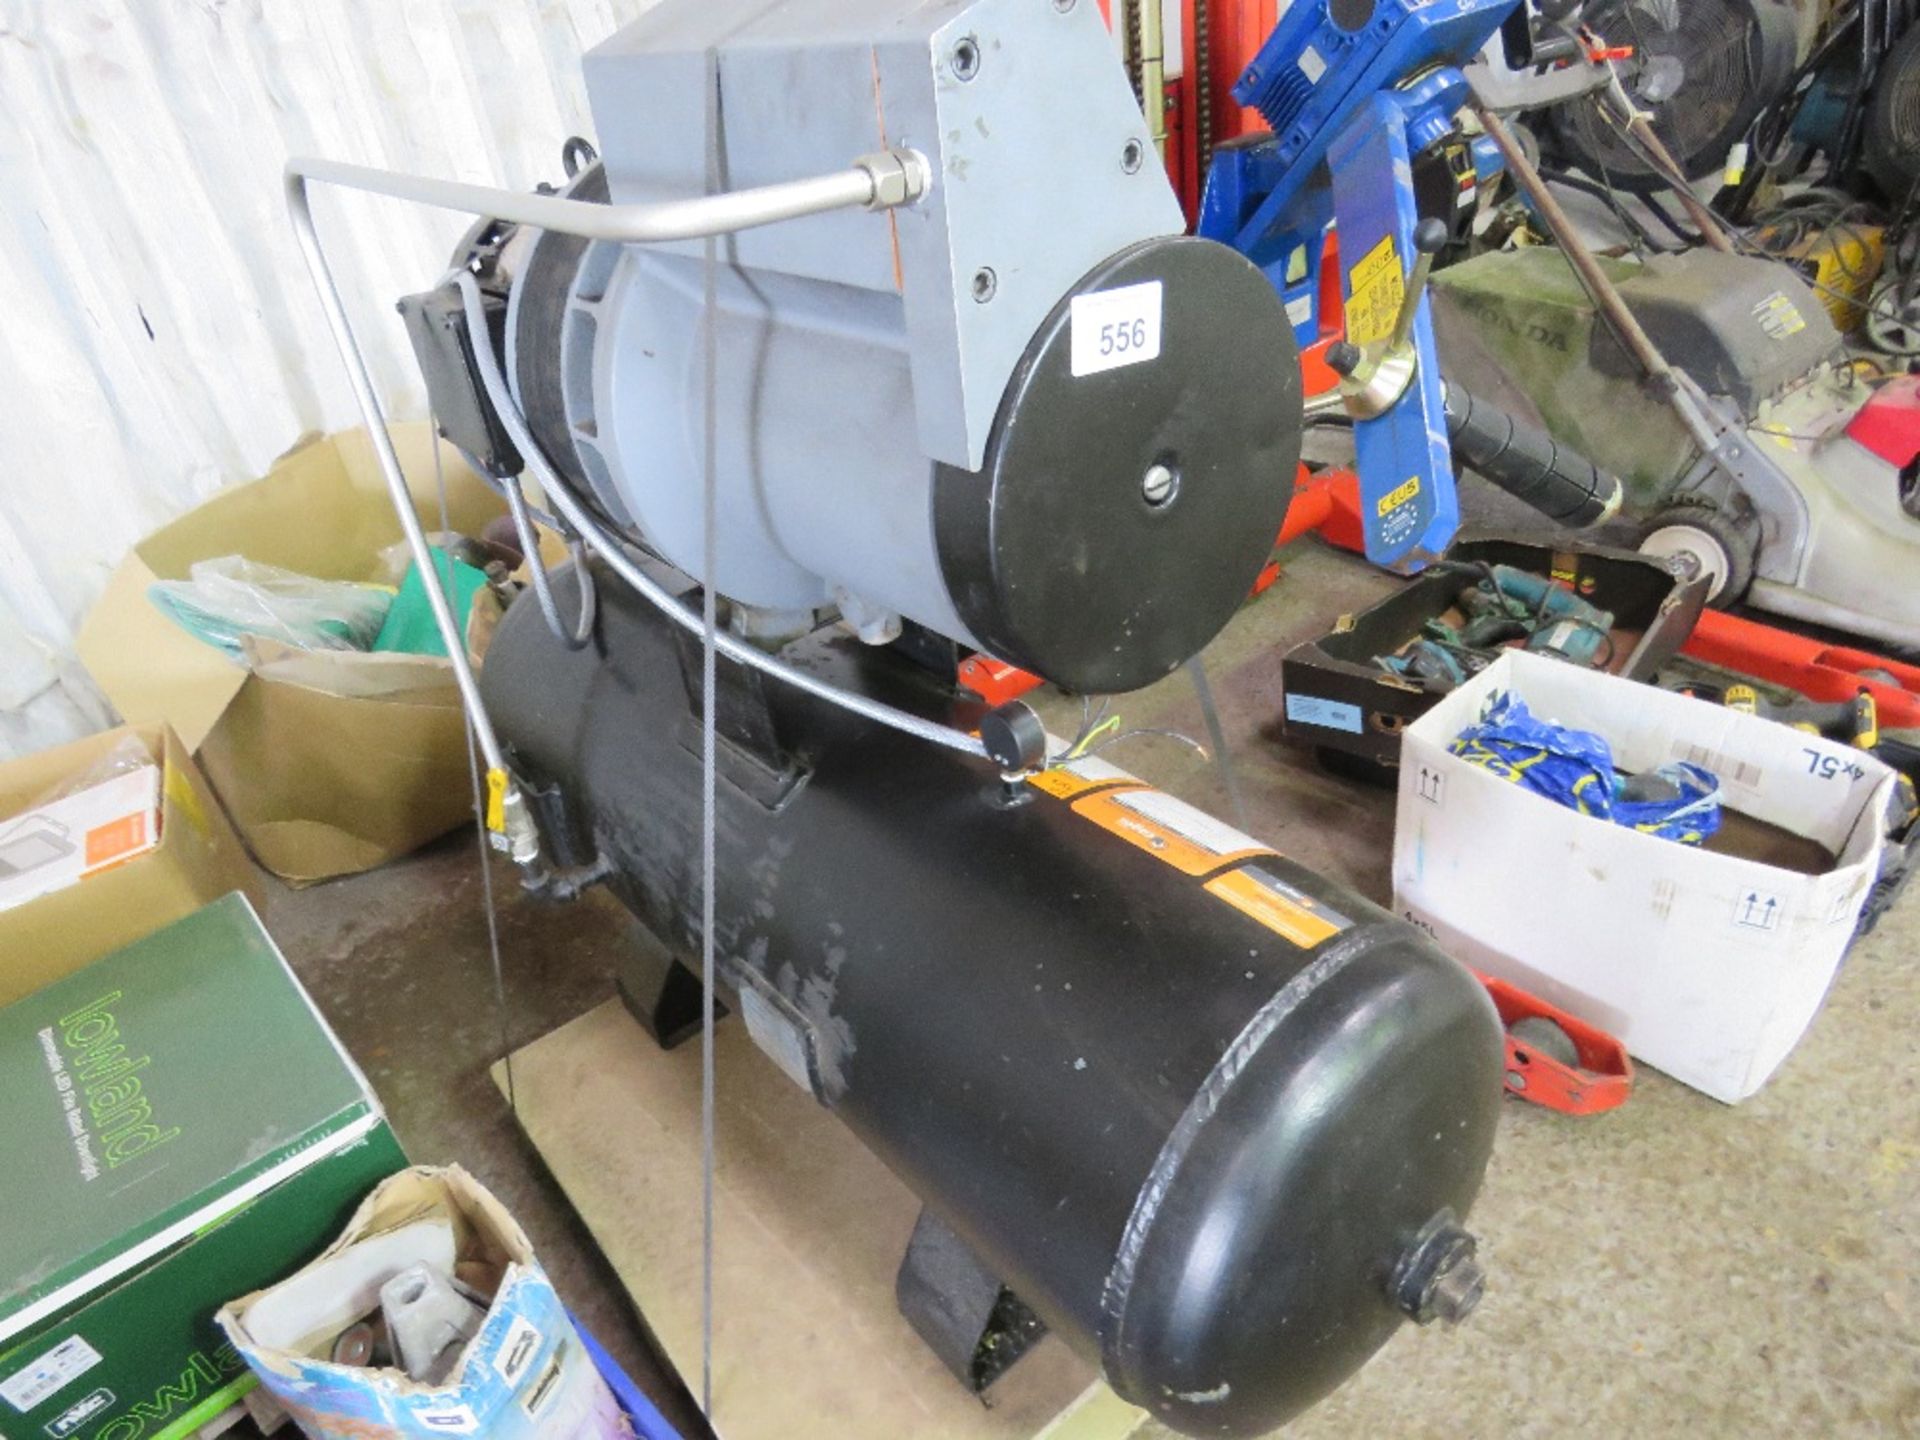 HYDROVANE 3PHASE POWERED COMPRESSOR. WORKING WHEN REMOVED. SOURCED FROM COMPANY LIQUIDATION. - Image 2 of 4